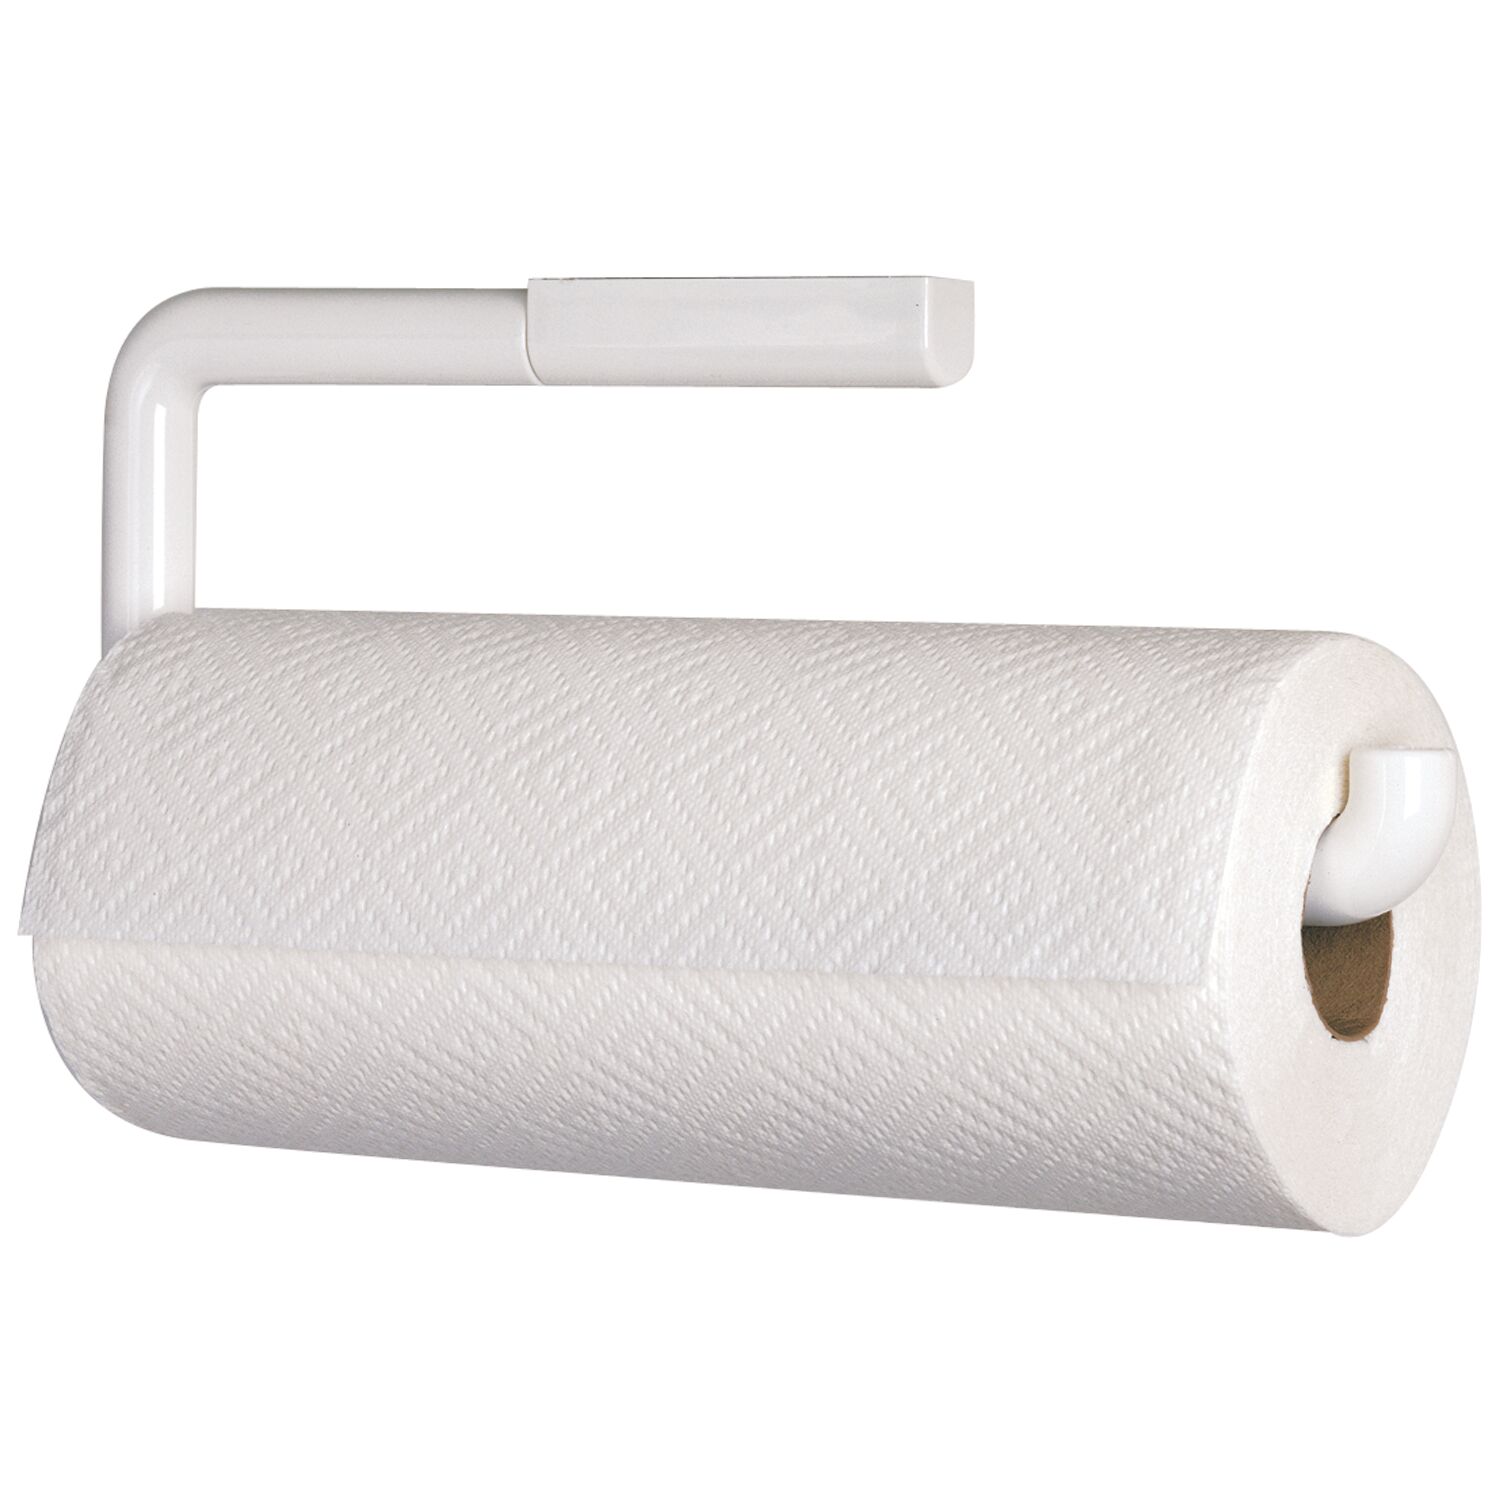 iDesign Plastic Wall Mounted Metal Paper Towel Holder, Roll Organizer ...